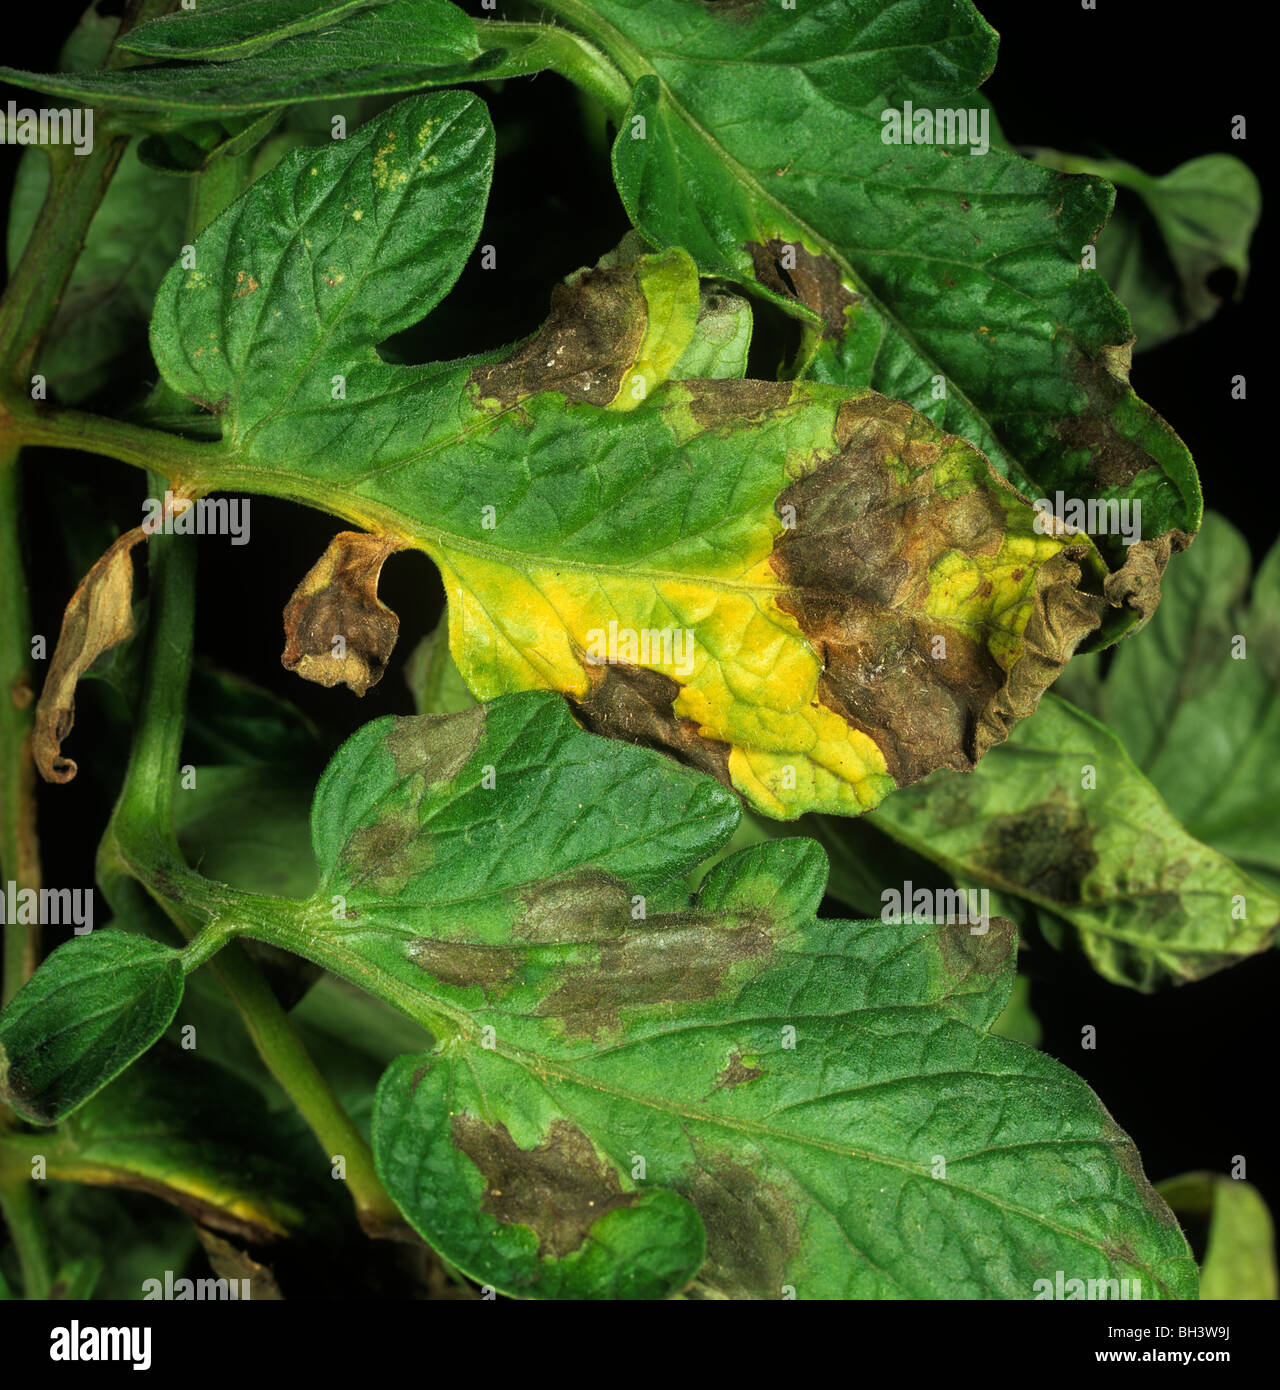 Tomato late blight (Phytophthora infestans) lesions and damage on tomato leaves Stock Photo